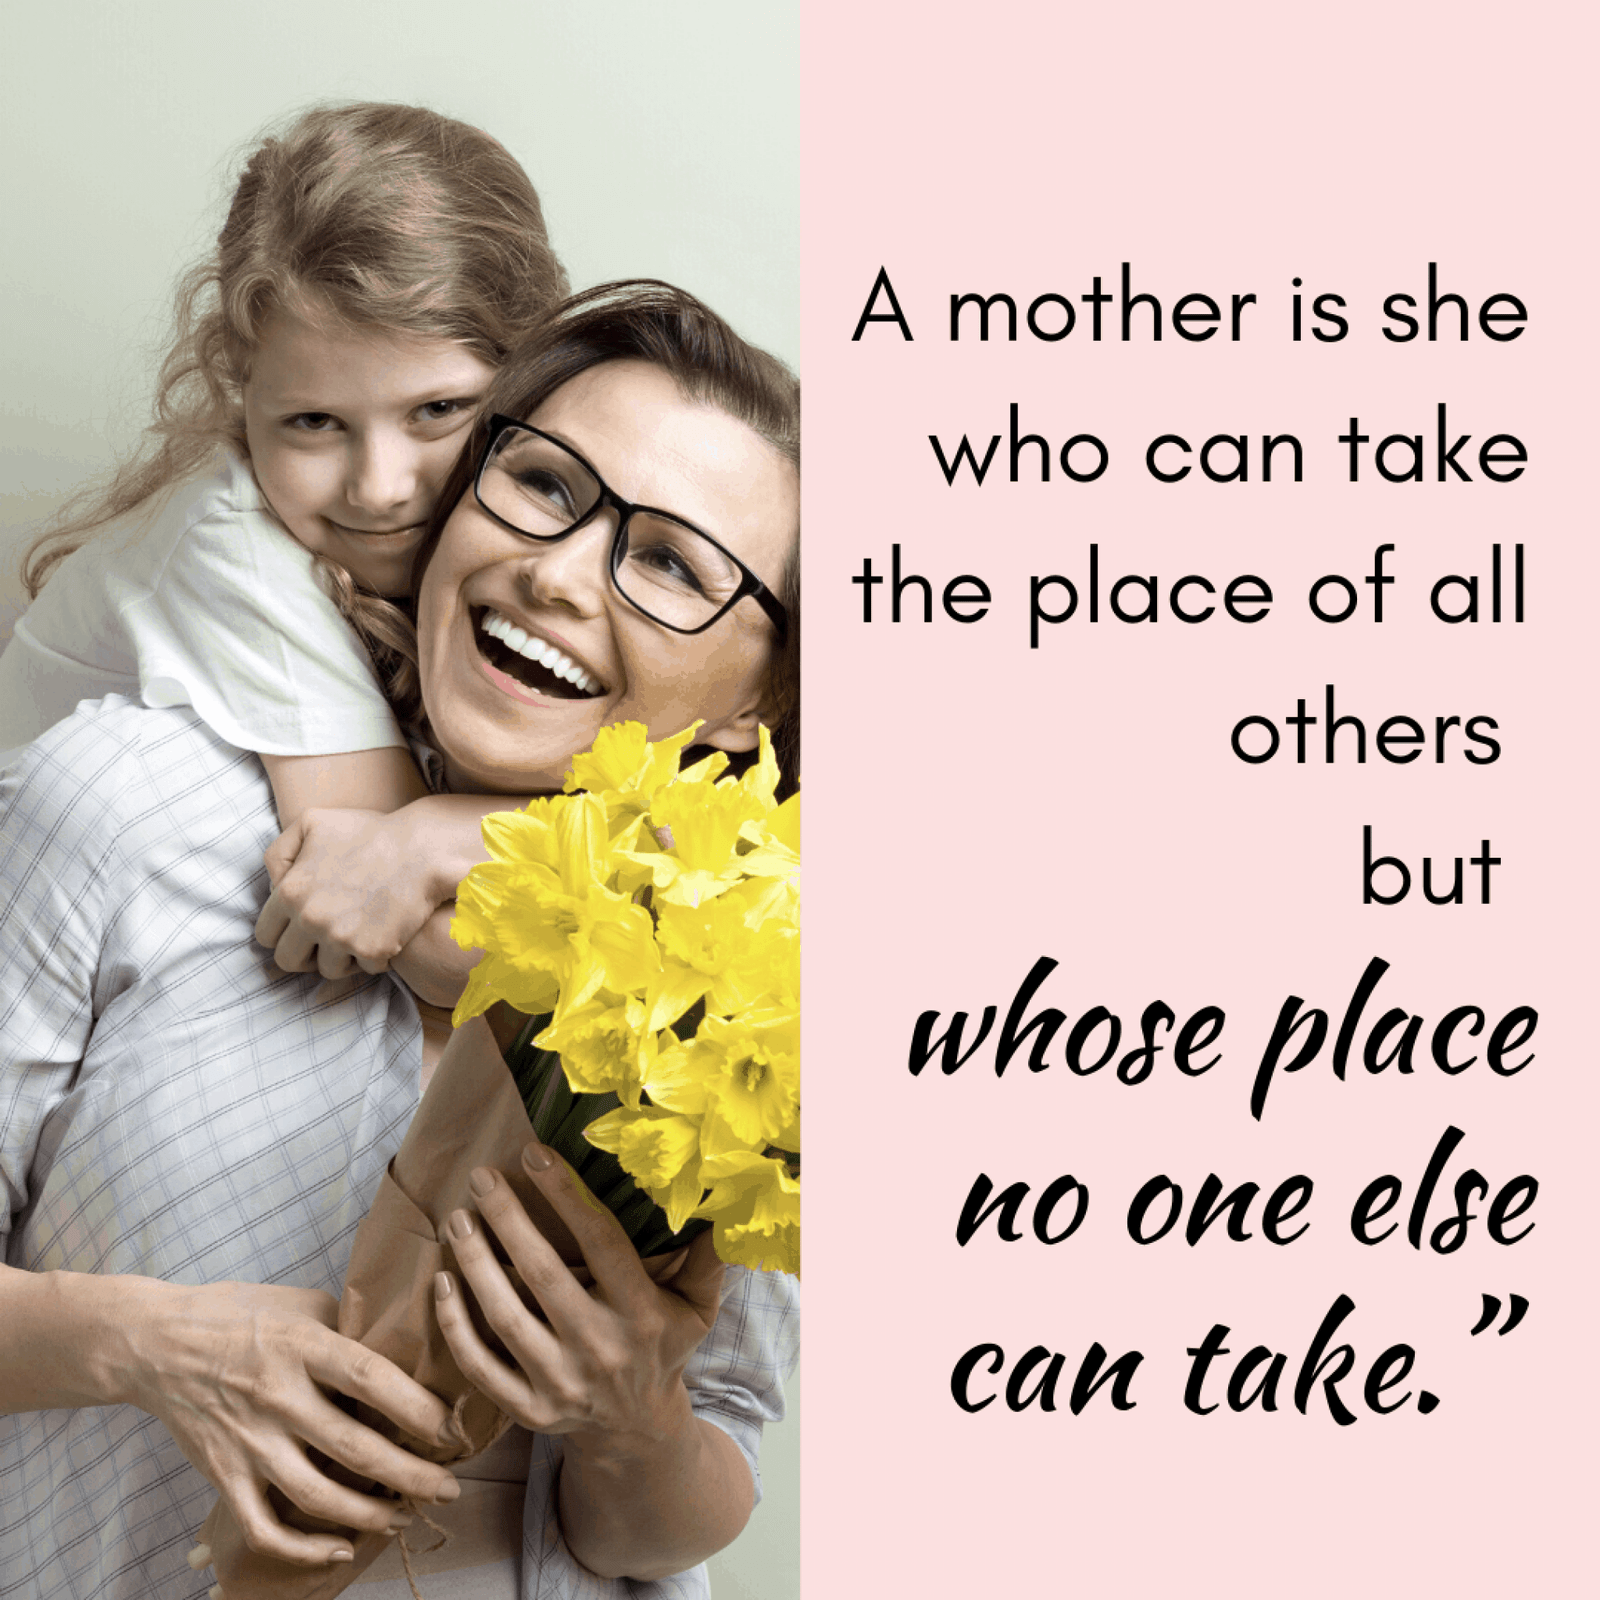 35+ Inspirational Quotes for Moms (Much needed for every mom)